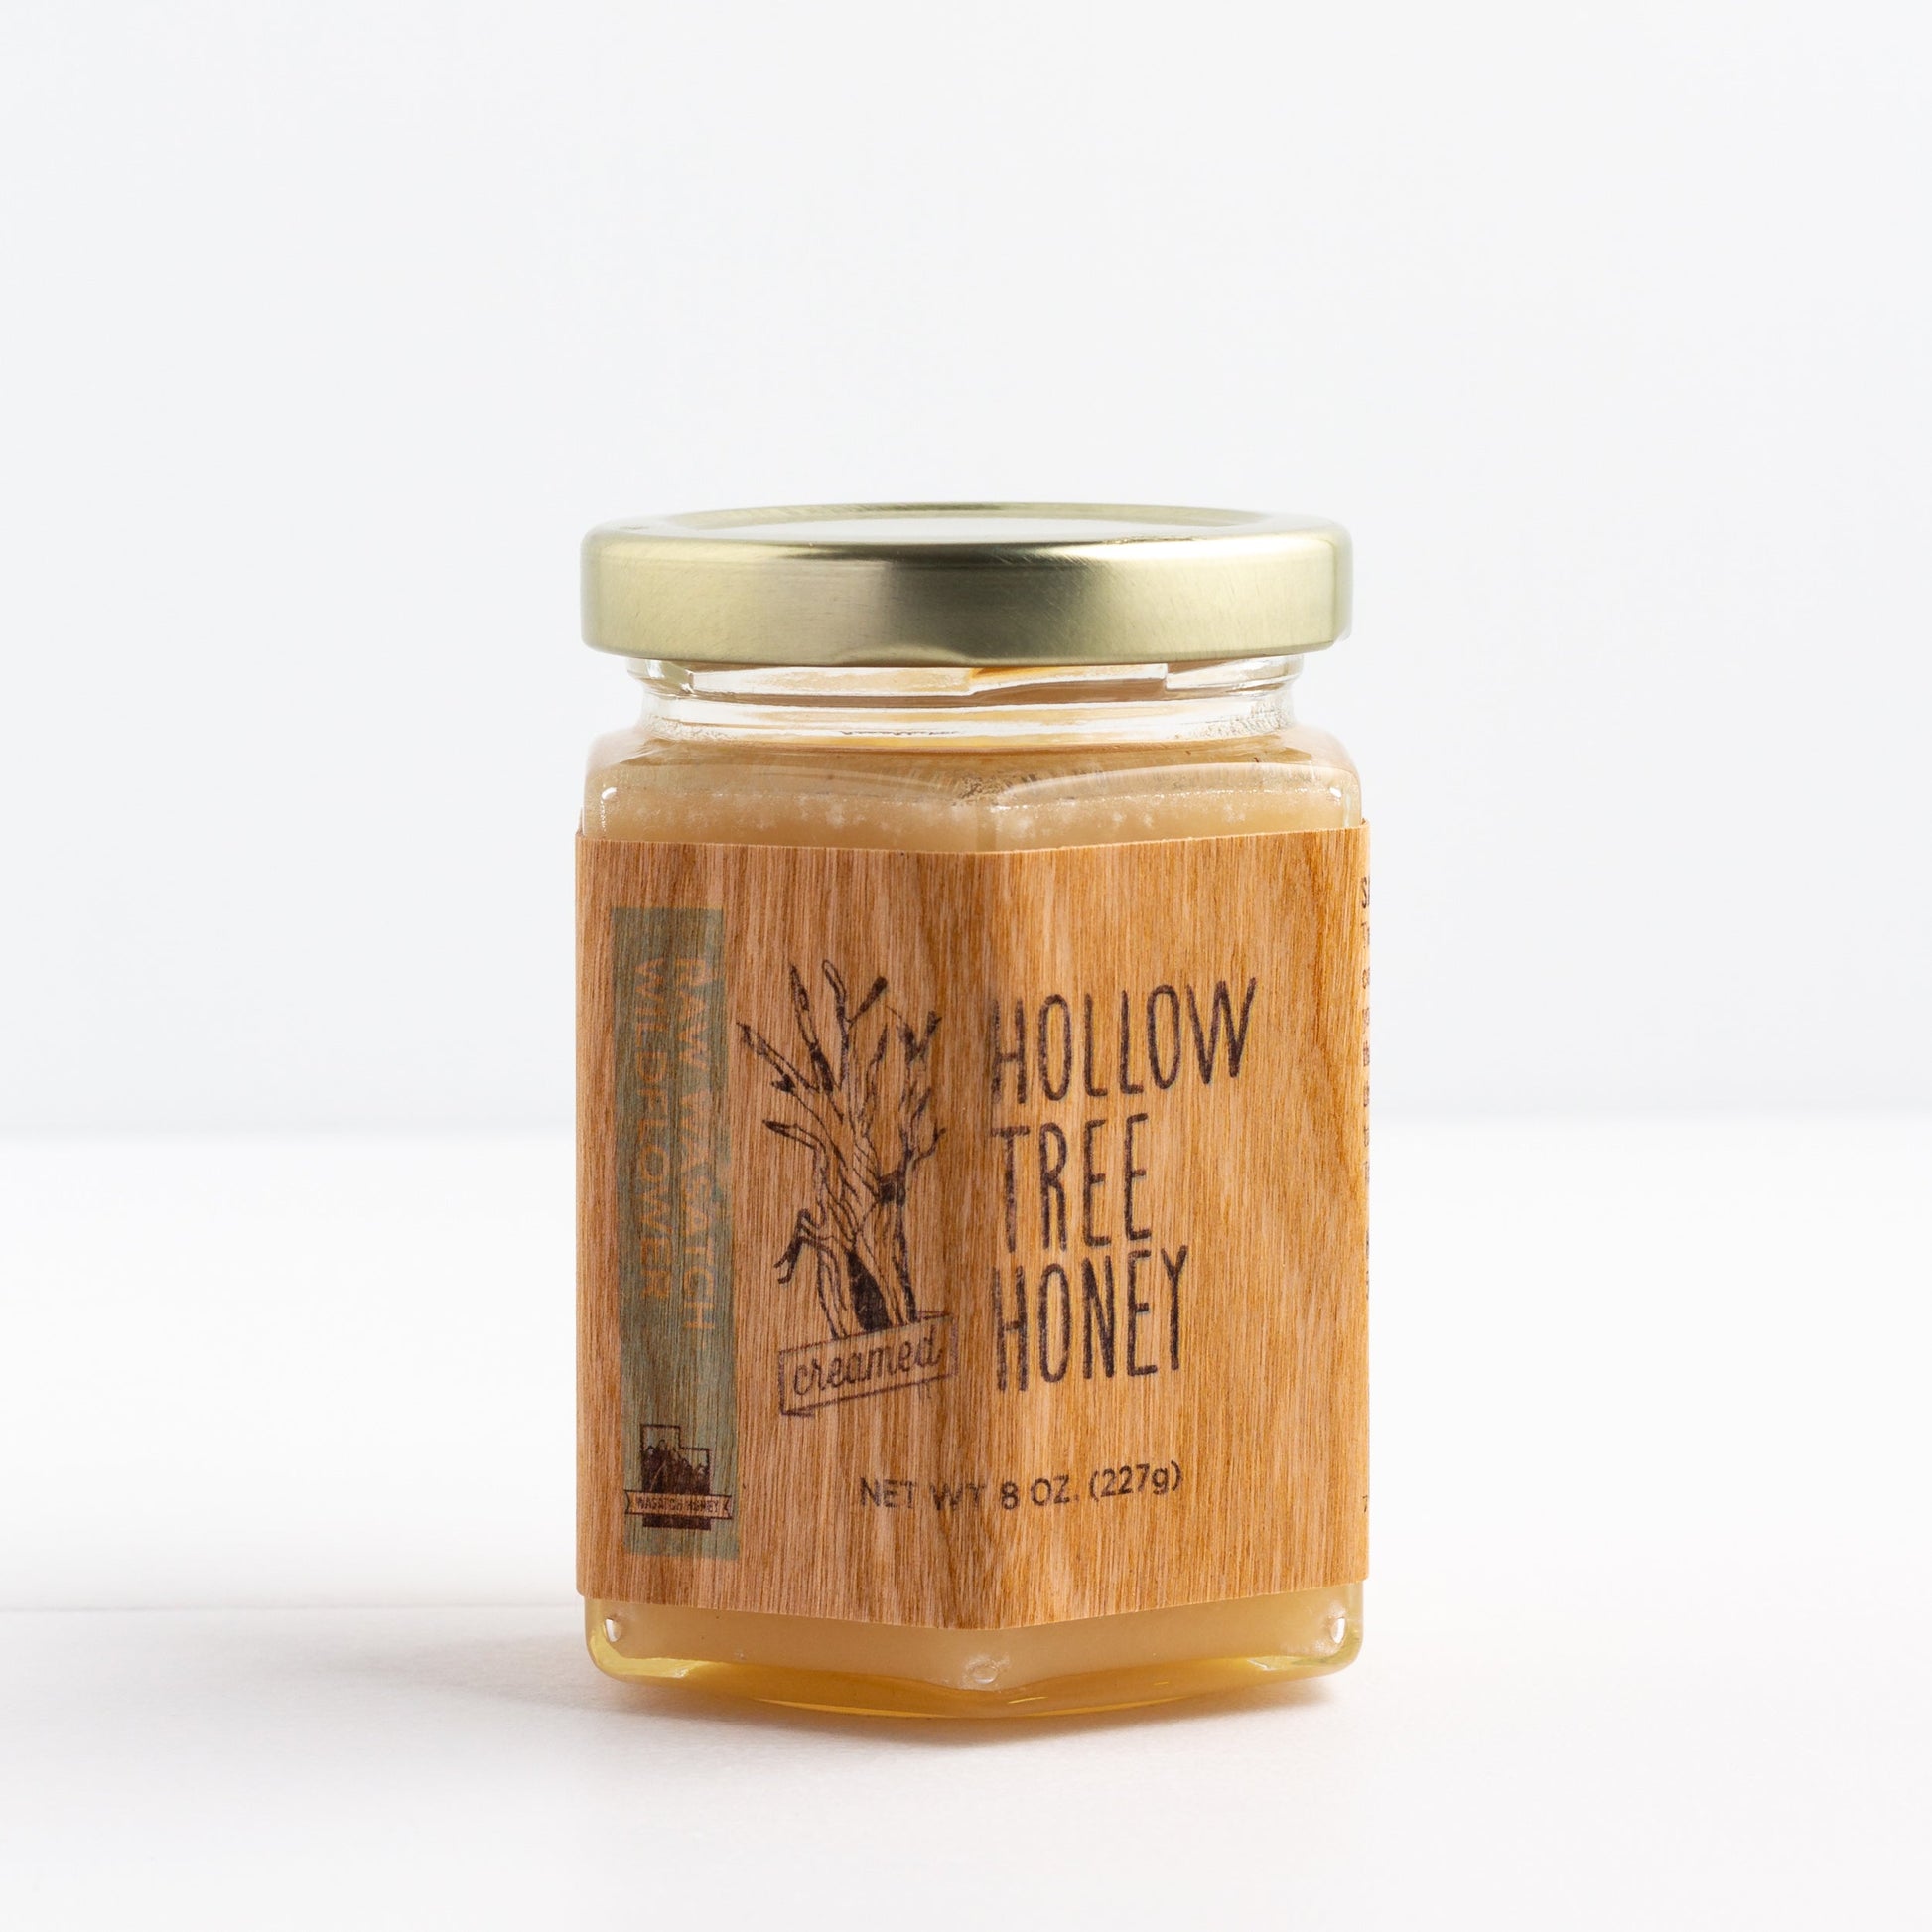 Hollow Tree Honey creamed honey (8 oz) packaged in a glass jar